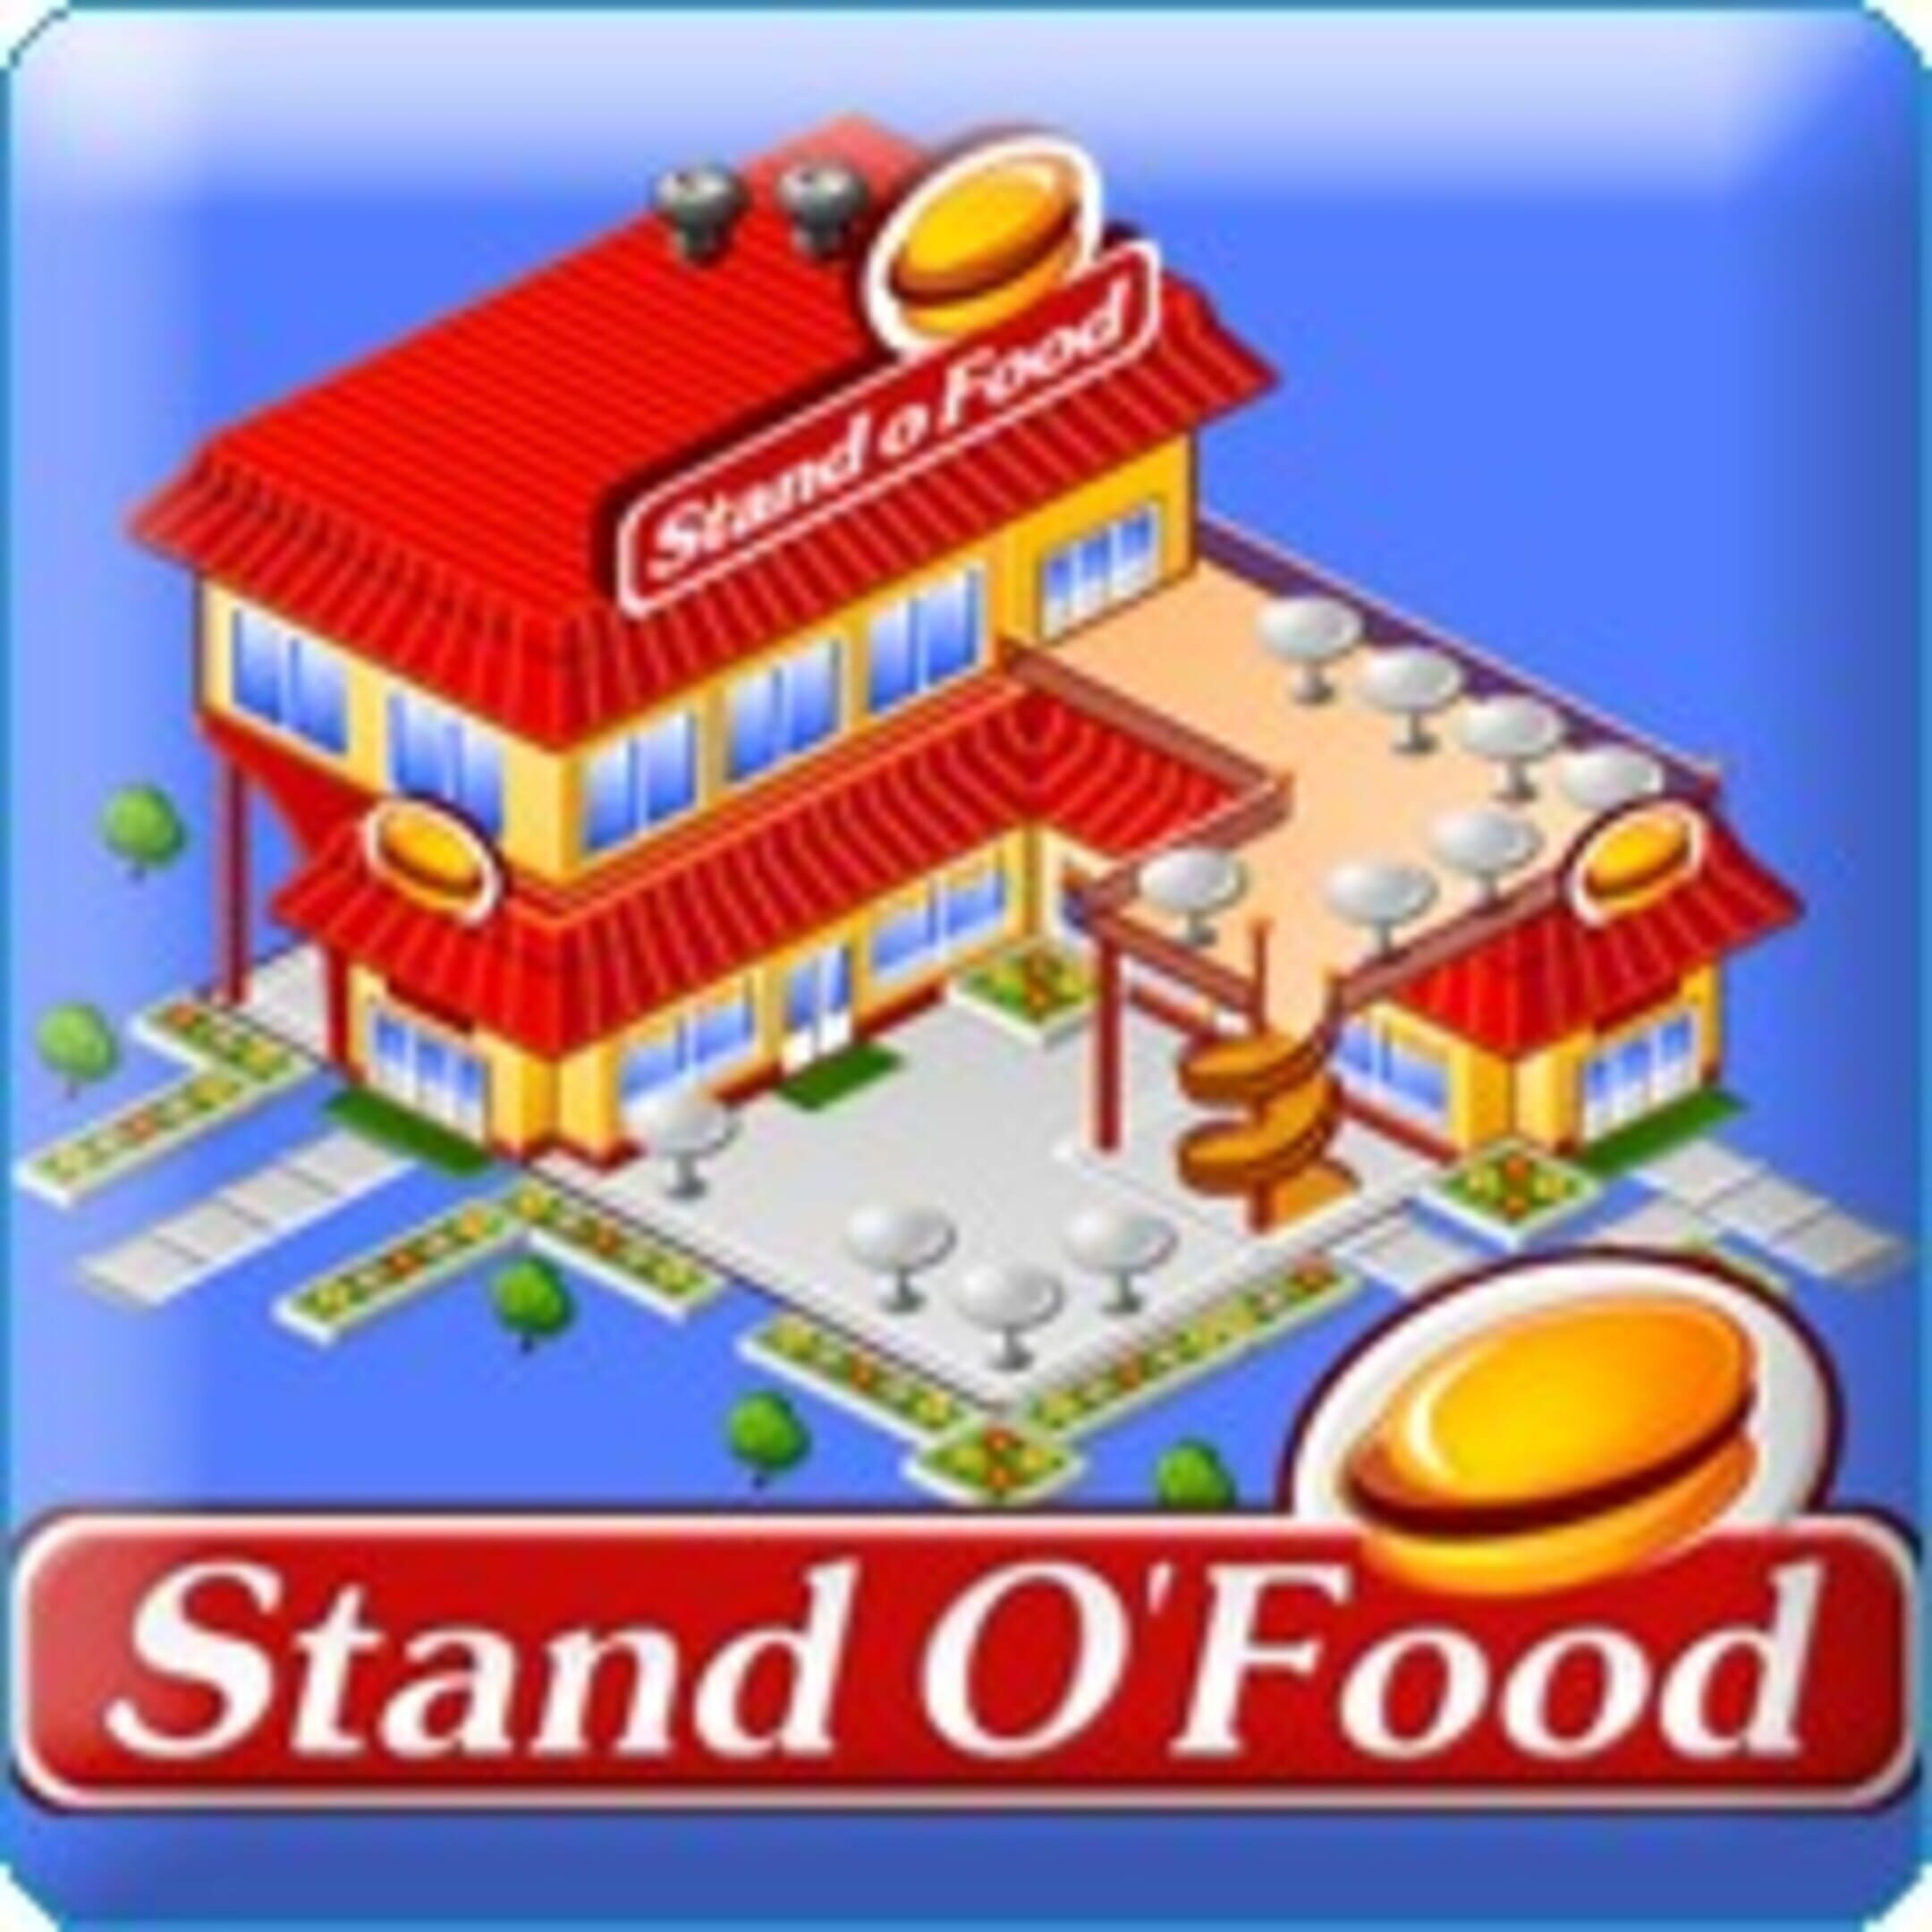 stand o food games